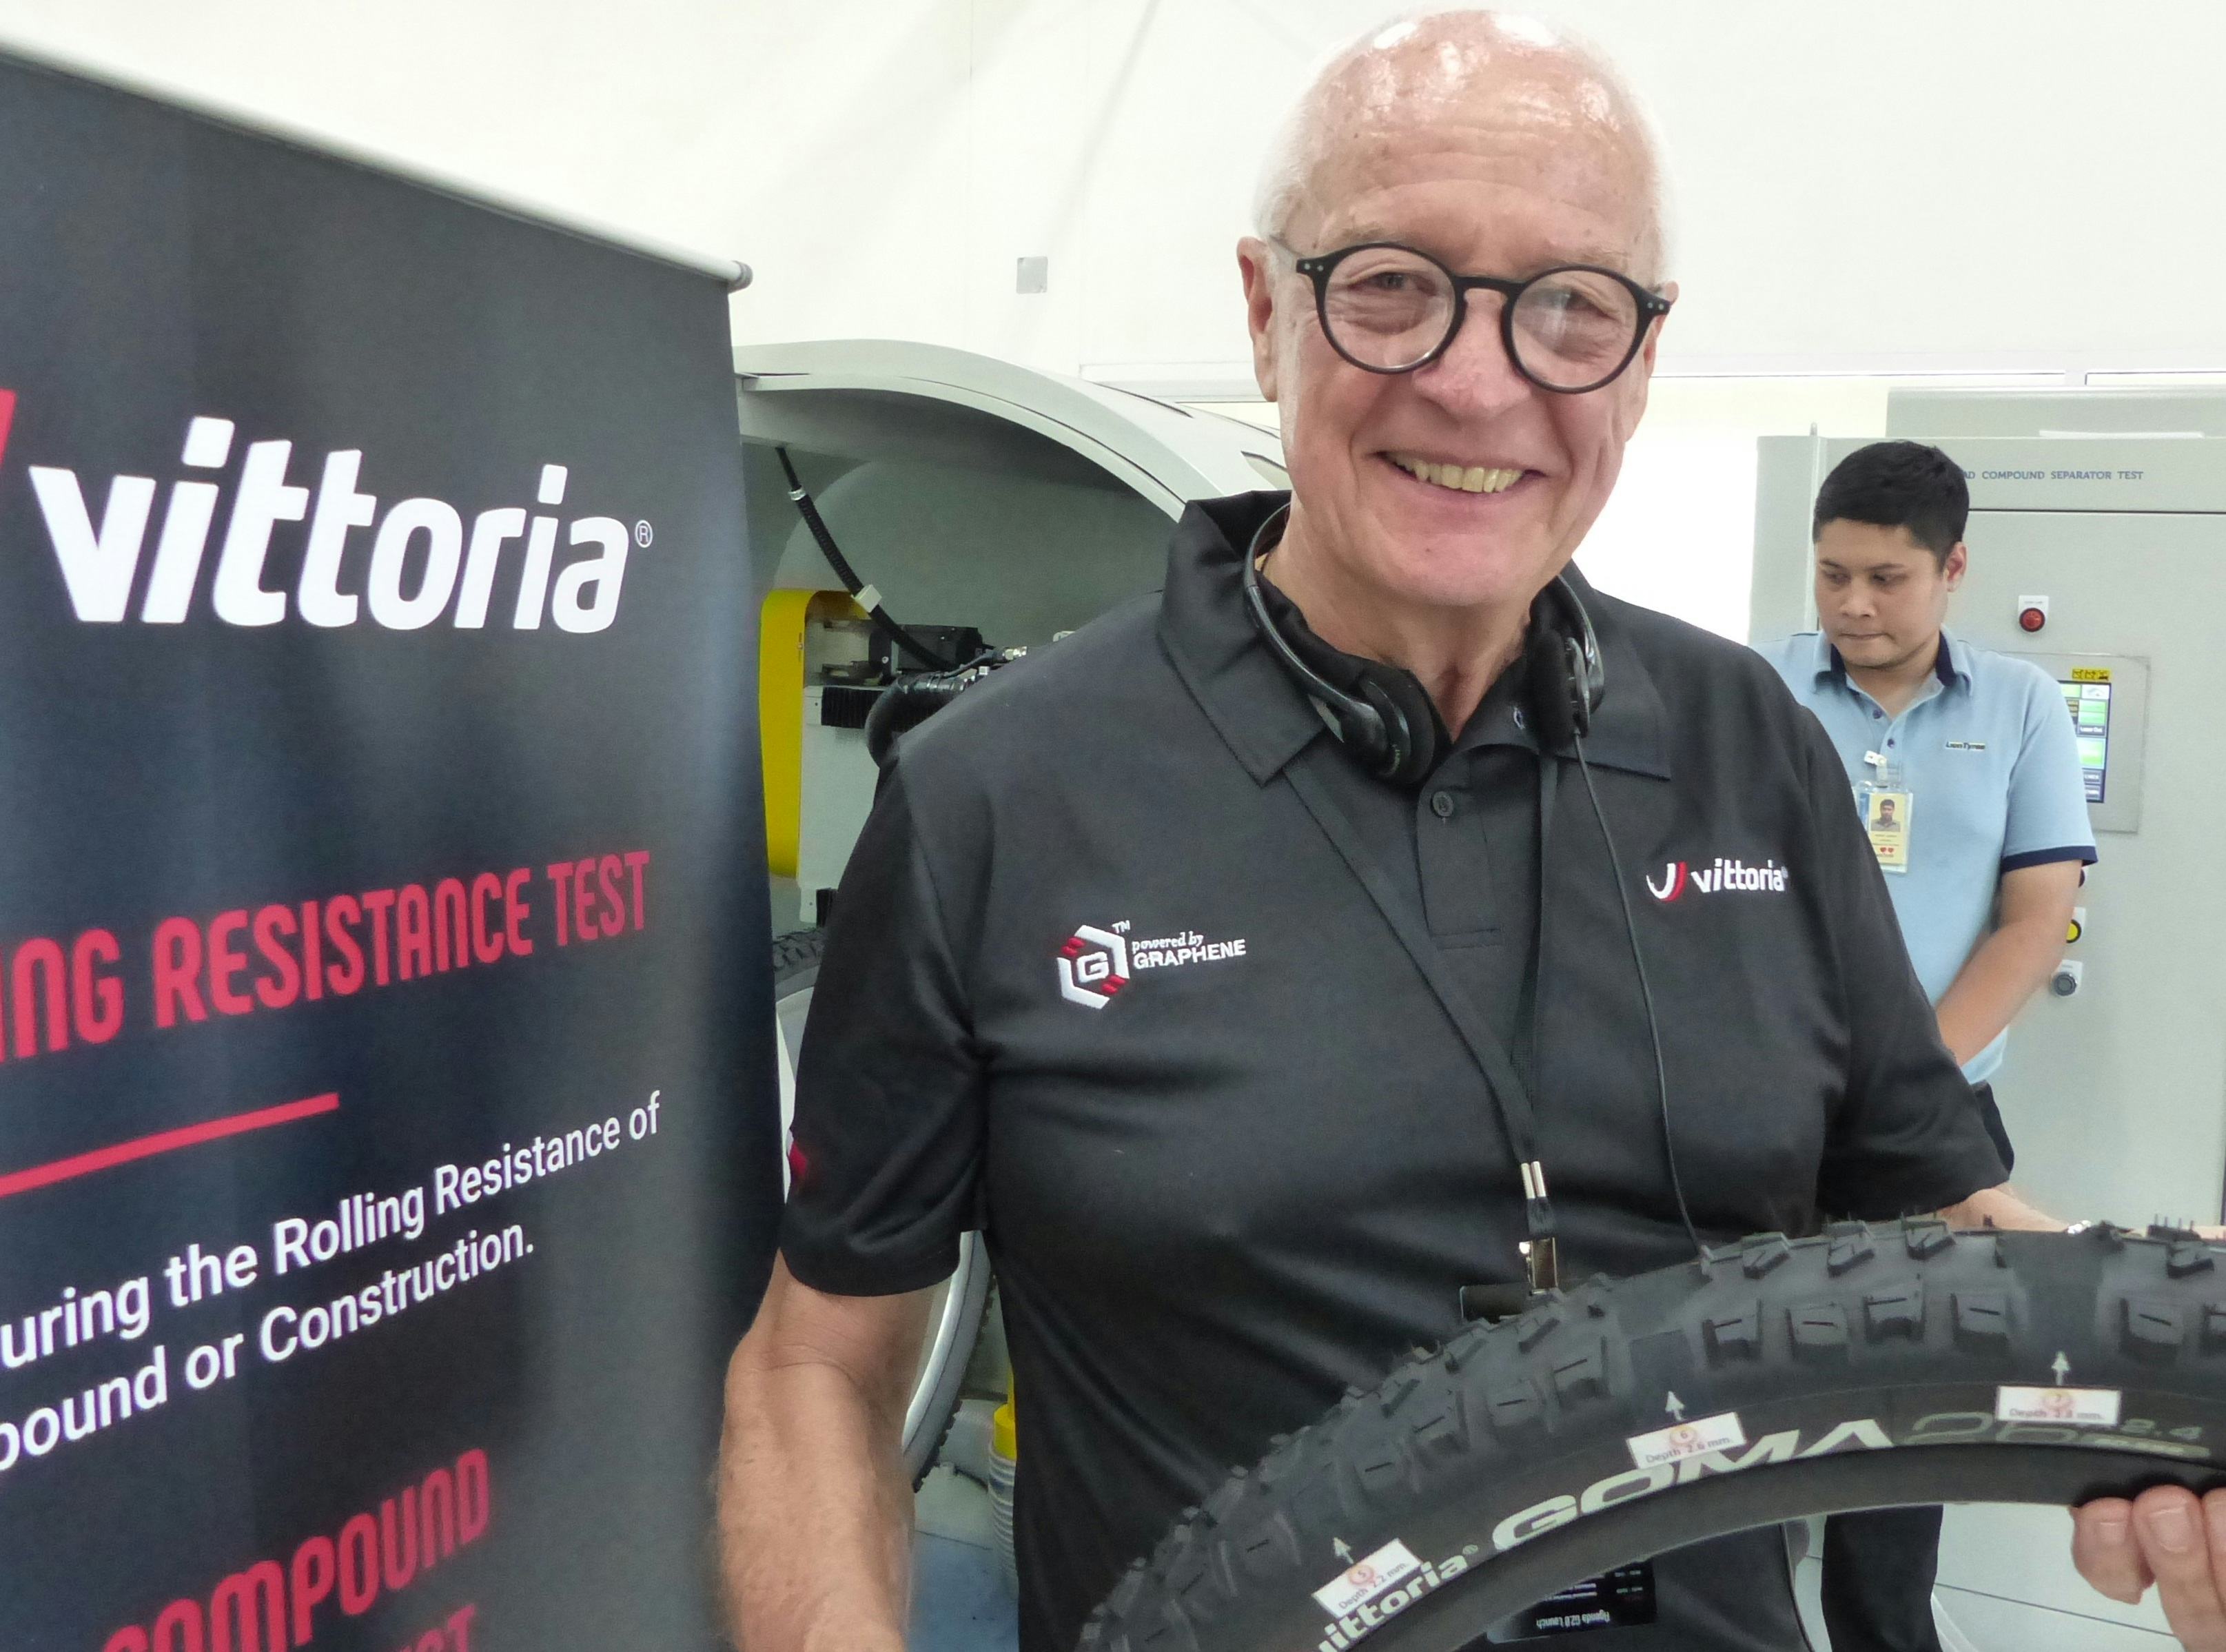 Vittoria Industries President Rudie Campagne, showing tyre made with 2nd generation Graphene enabling performance boosts for specific characteristics. – Photo Bike Europe